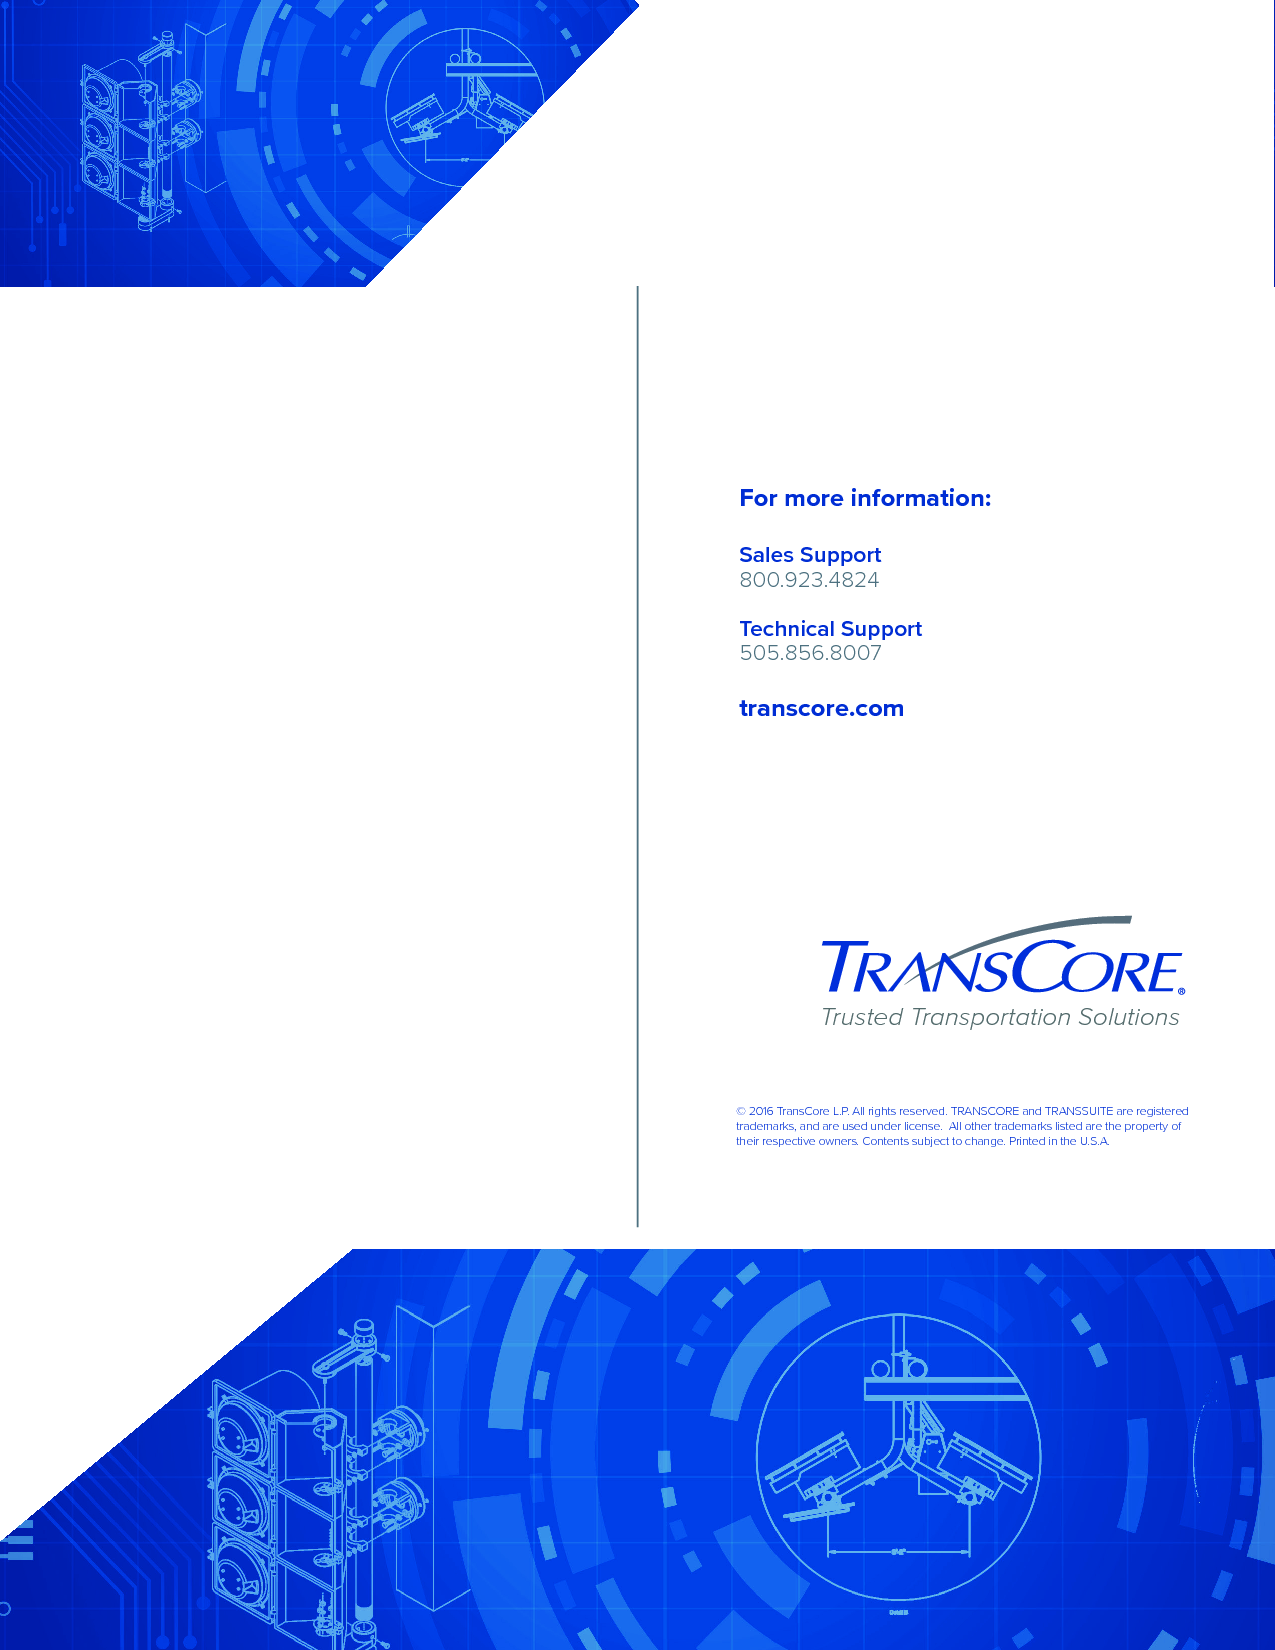 For more information: Sales Support 800.923.4824 Technical Support 505.856.8007transcore.com  Trusted Transportation Solutions© 2016 TransCore L.P. All rights reserved. TRANSCORE and TRANSSUITE are registered trademarks, and are used under license.  All other trademarks listed are the property of their respective owners. Contents subject to change. Printed in the U.S.A.